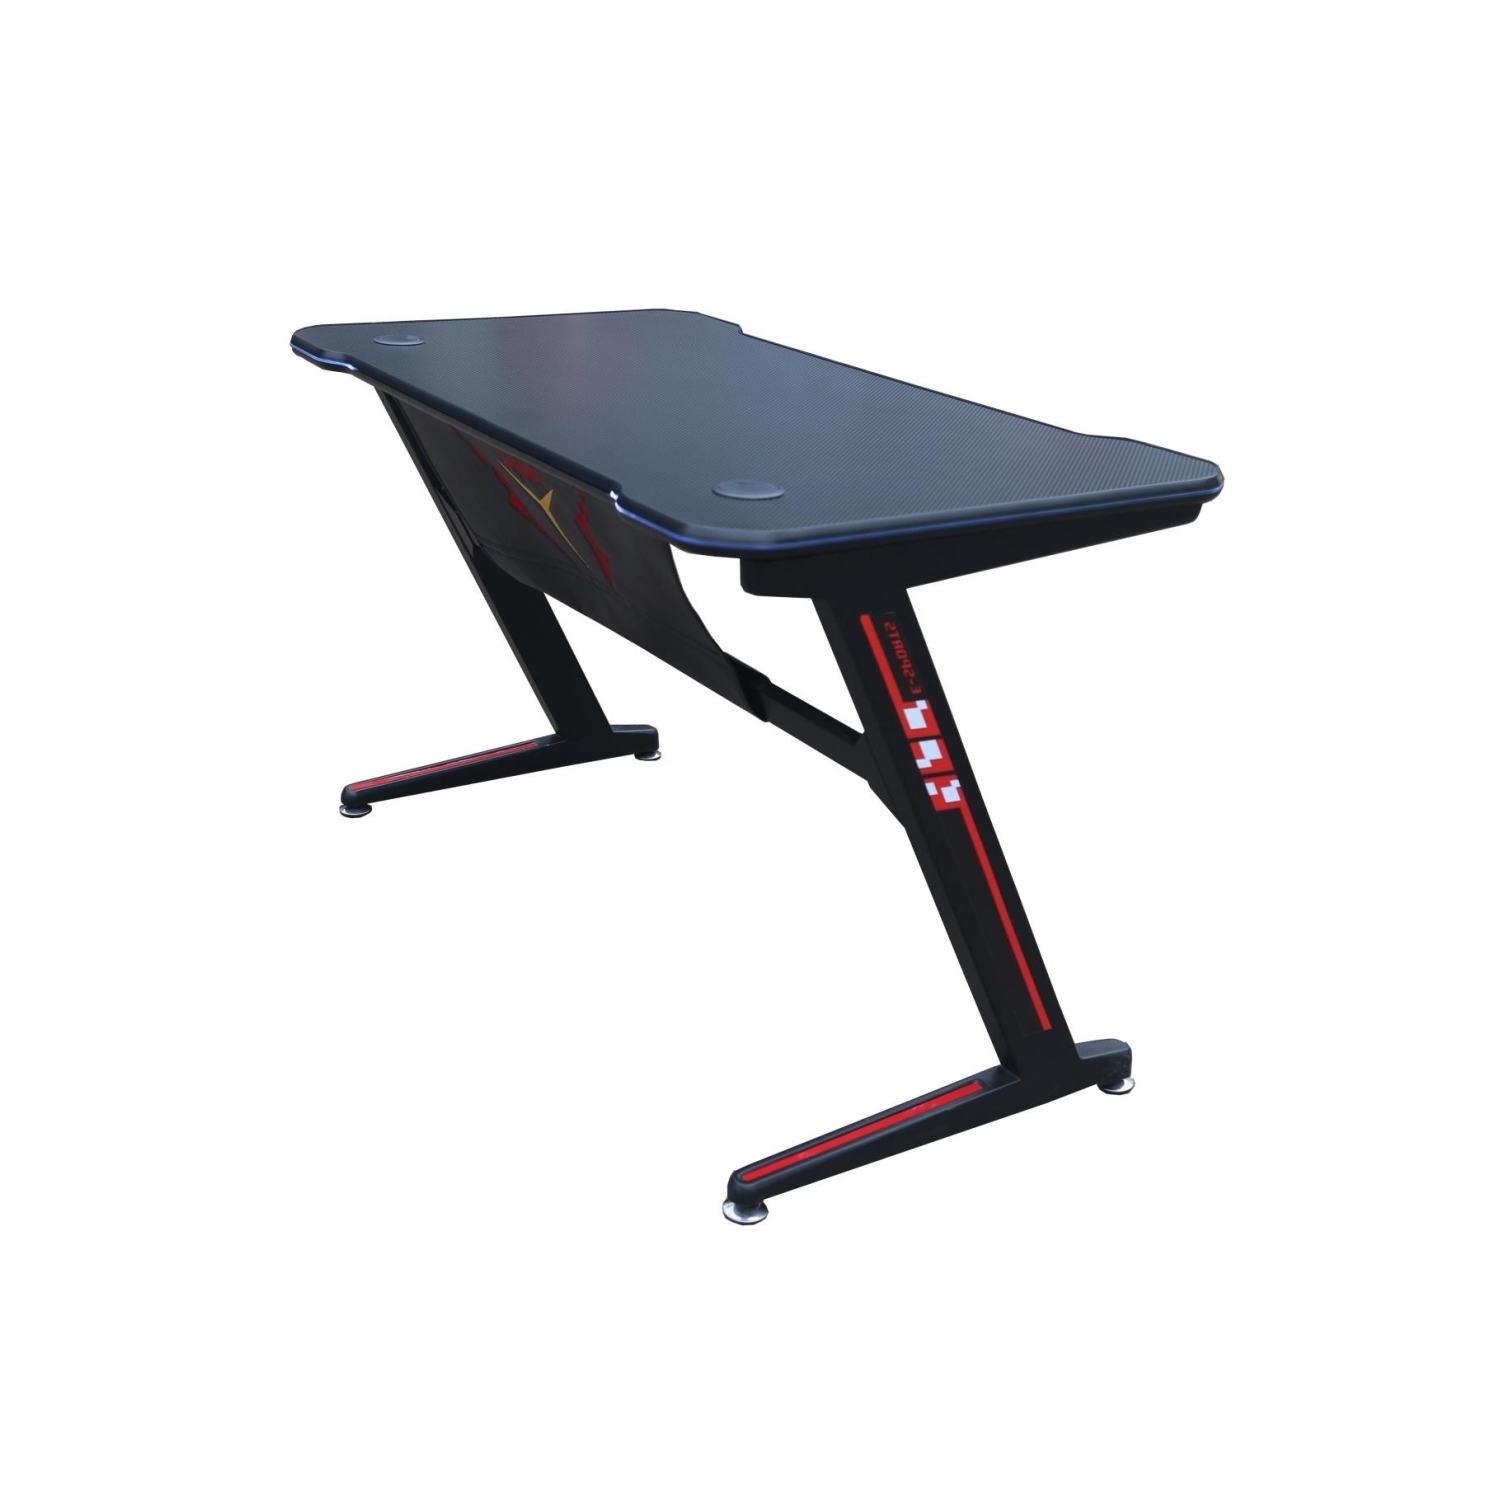 Z-Shaped Table W/Blue Led Light Metal table Home Office Racing Gaming Desk Black 